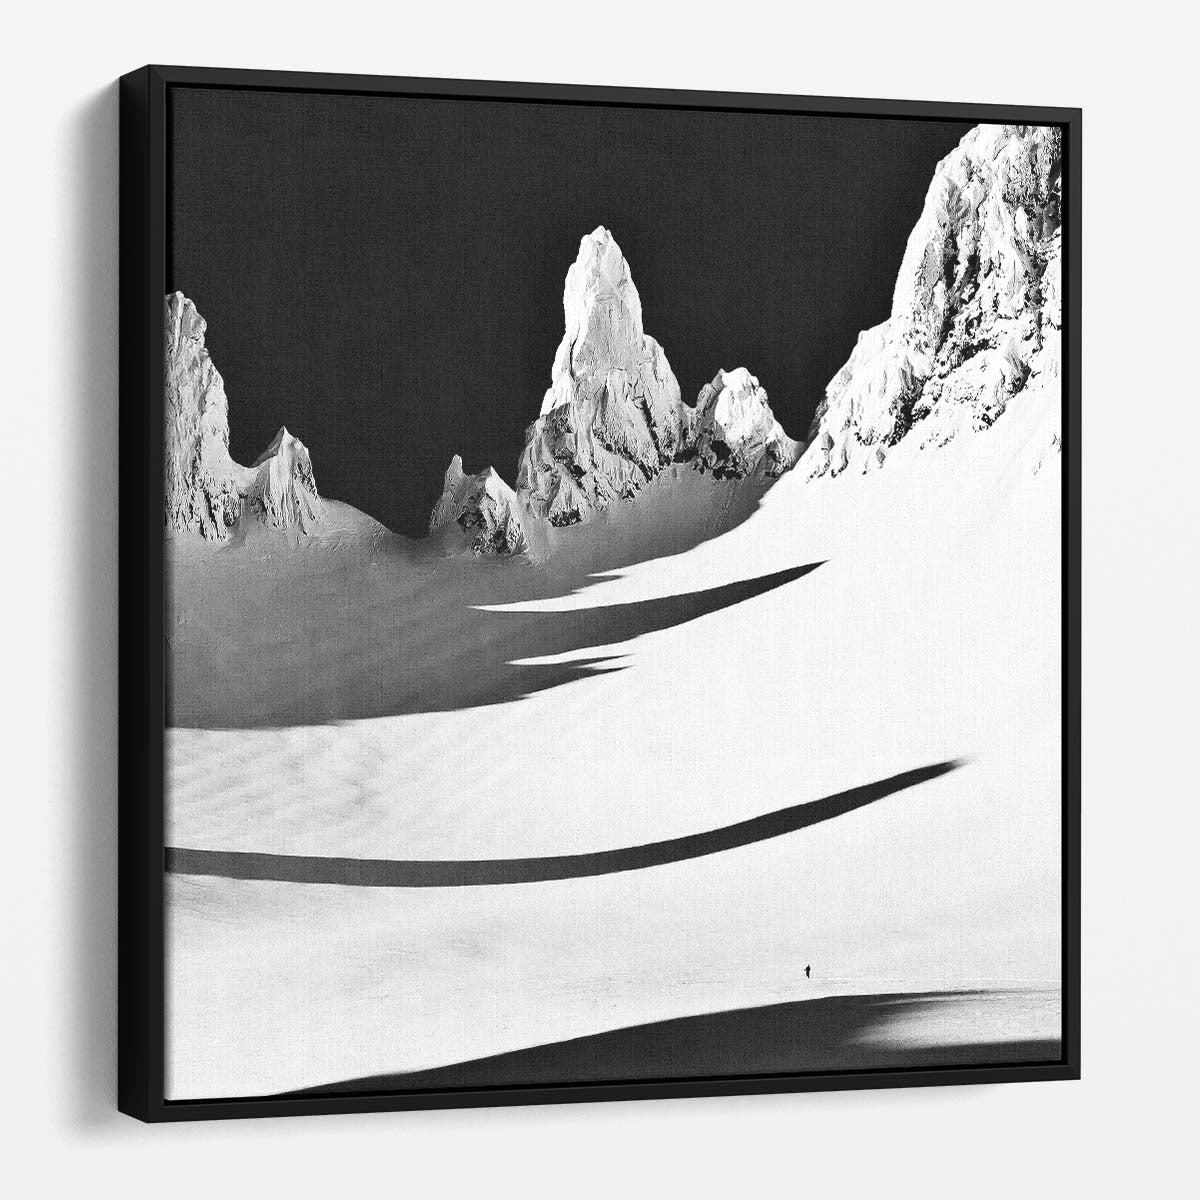 Monochrome Skier's Adventure in Snowy Mountain Landscape Wall Art by Luxuriance Designs. Made in USA.